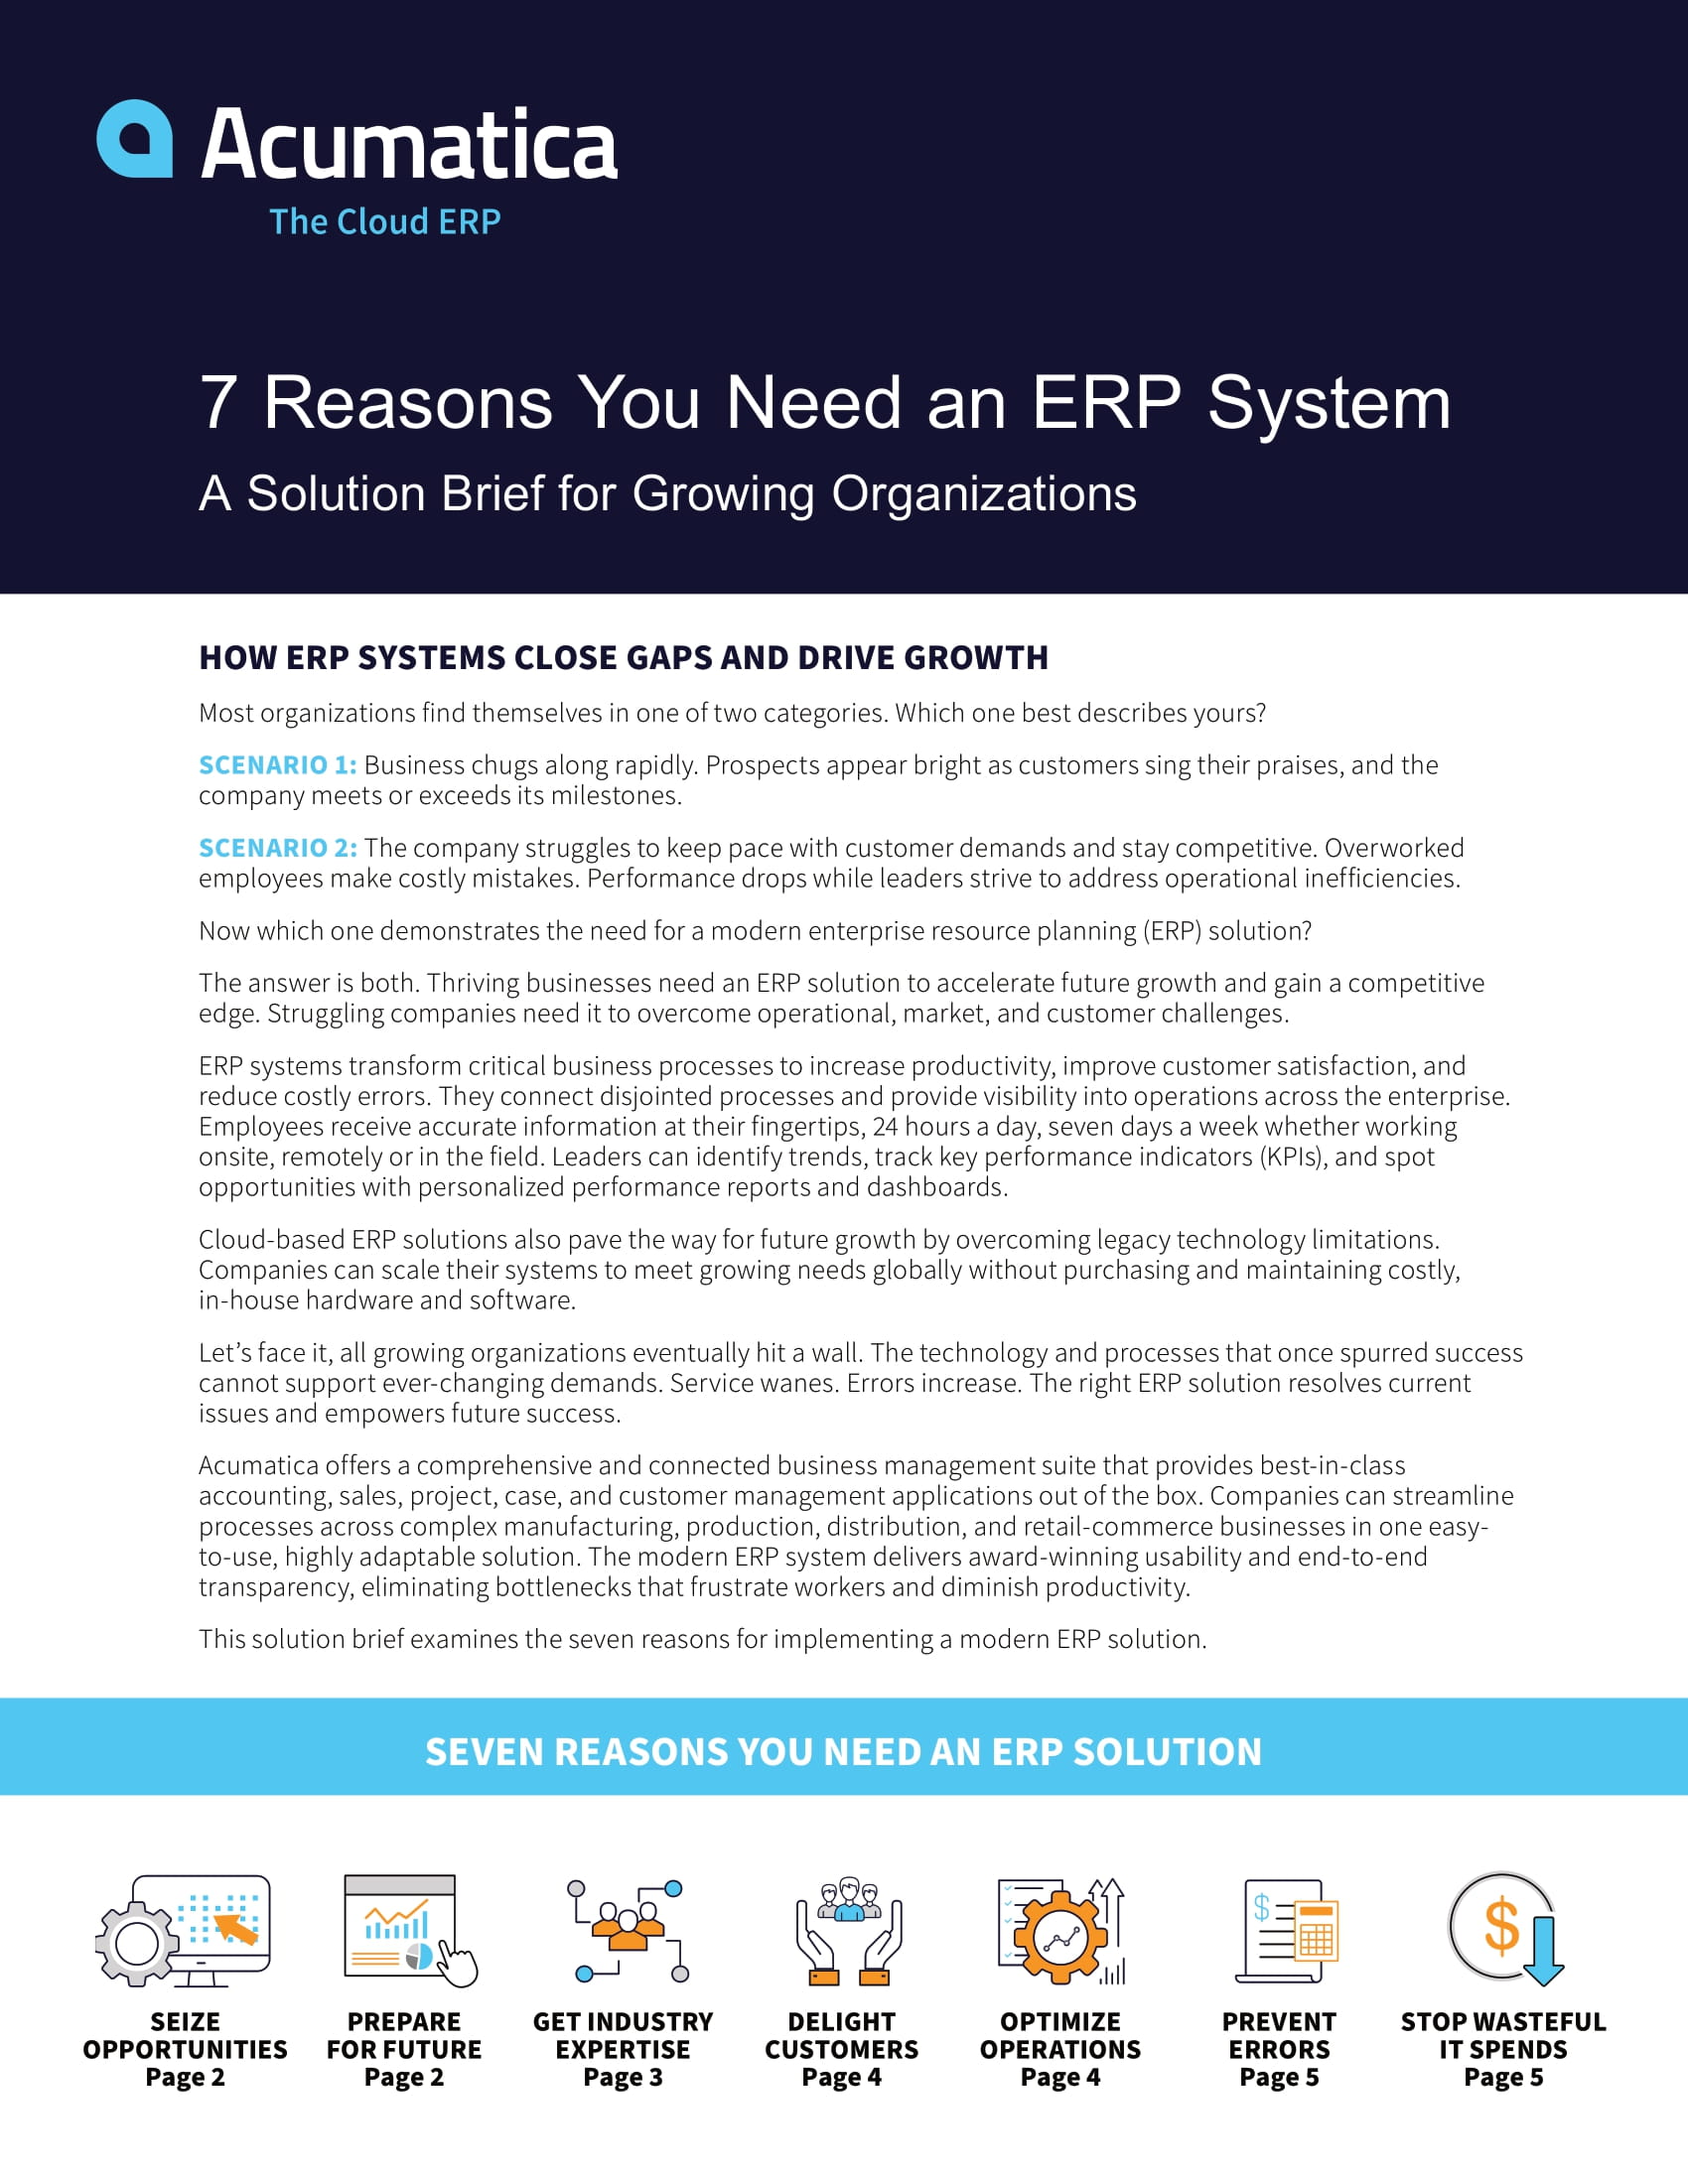 Why Today’s Thriving and Struggling Businesses Need an ERP Solution